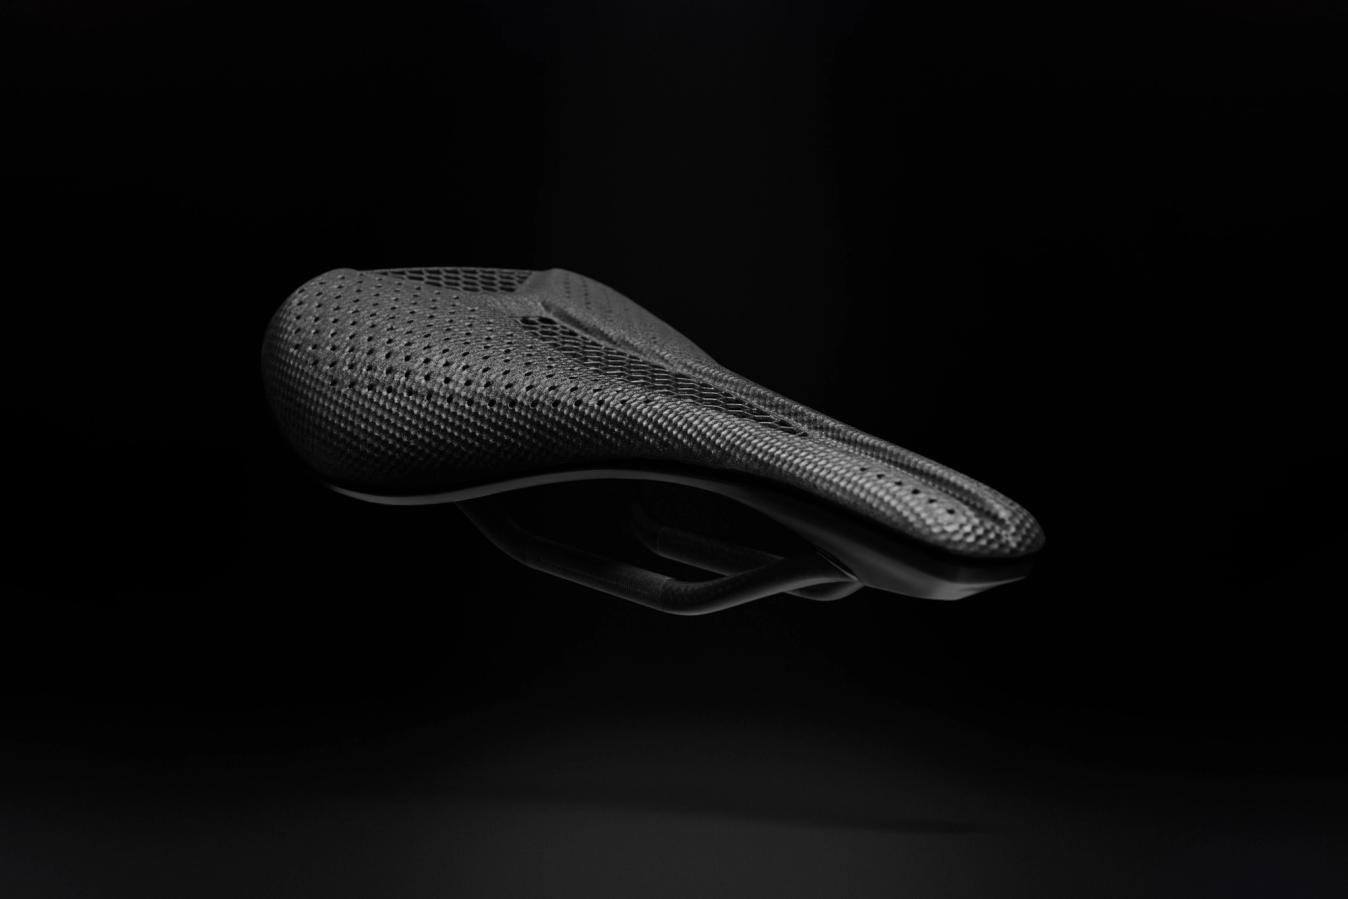 The new saddle uses 3D-printing to create a variable density saddle that is tuned to the specific needs of each area